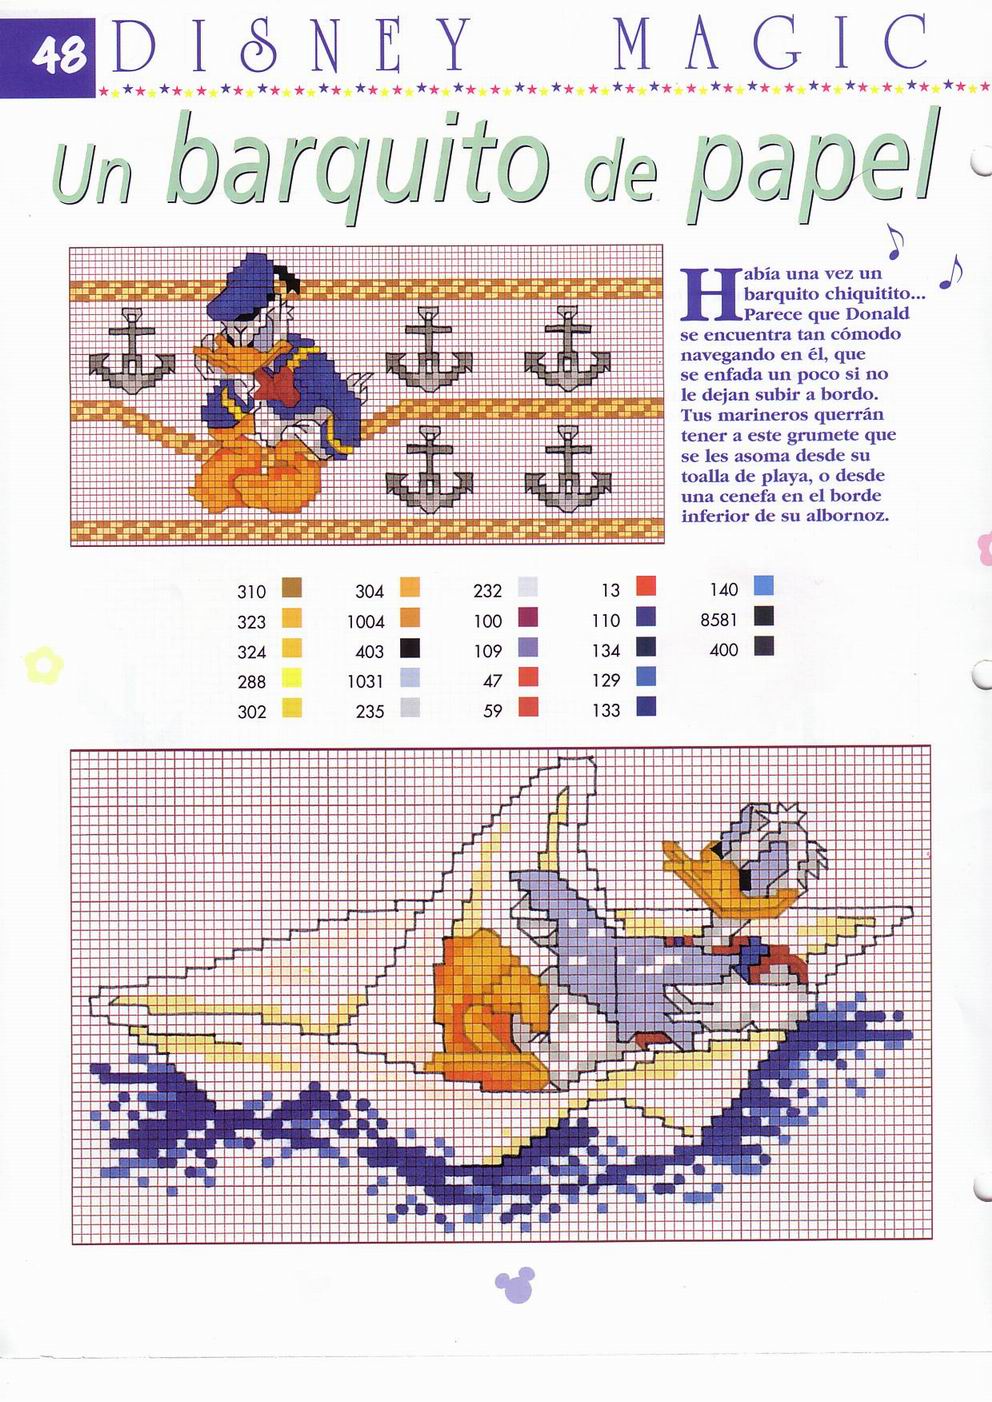 Cross stitch patterns of Uncle Donald Duck reading a book